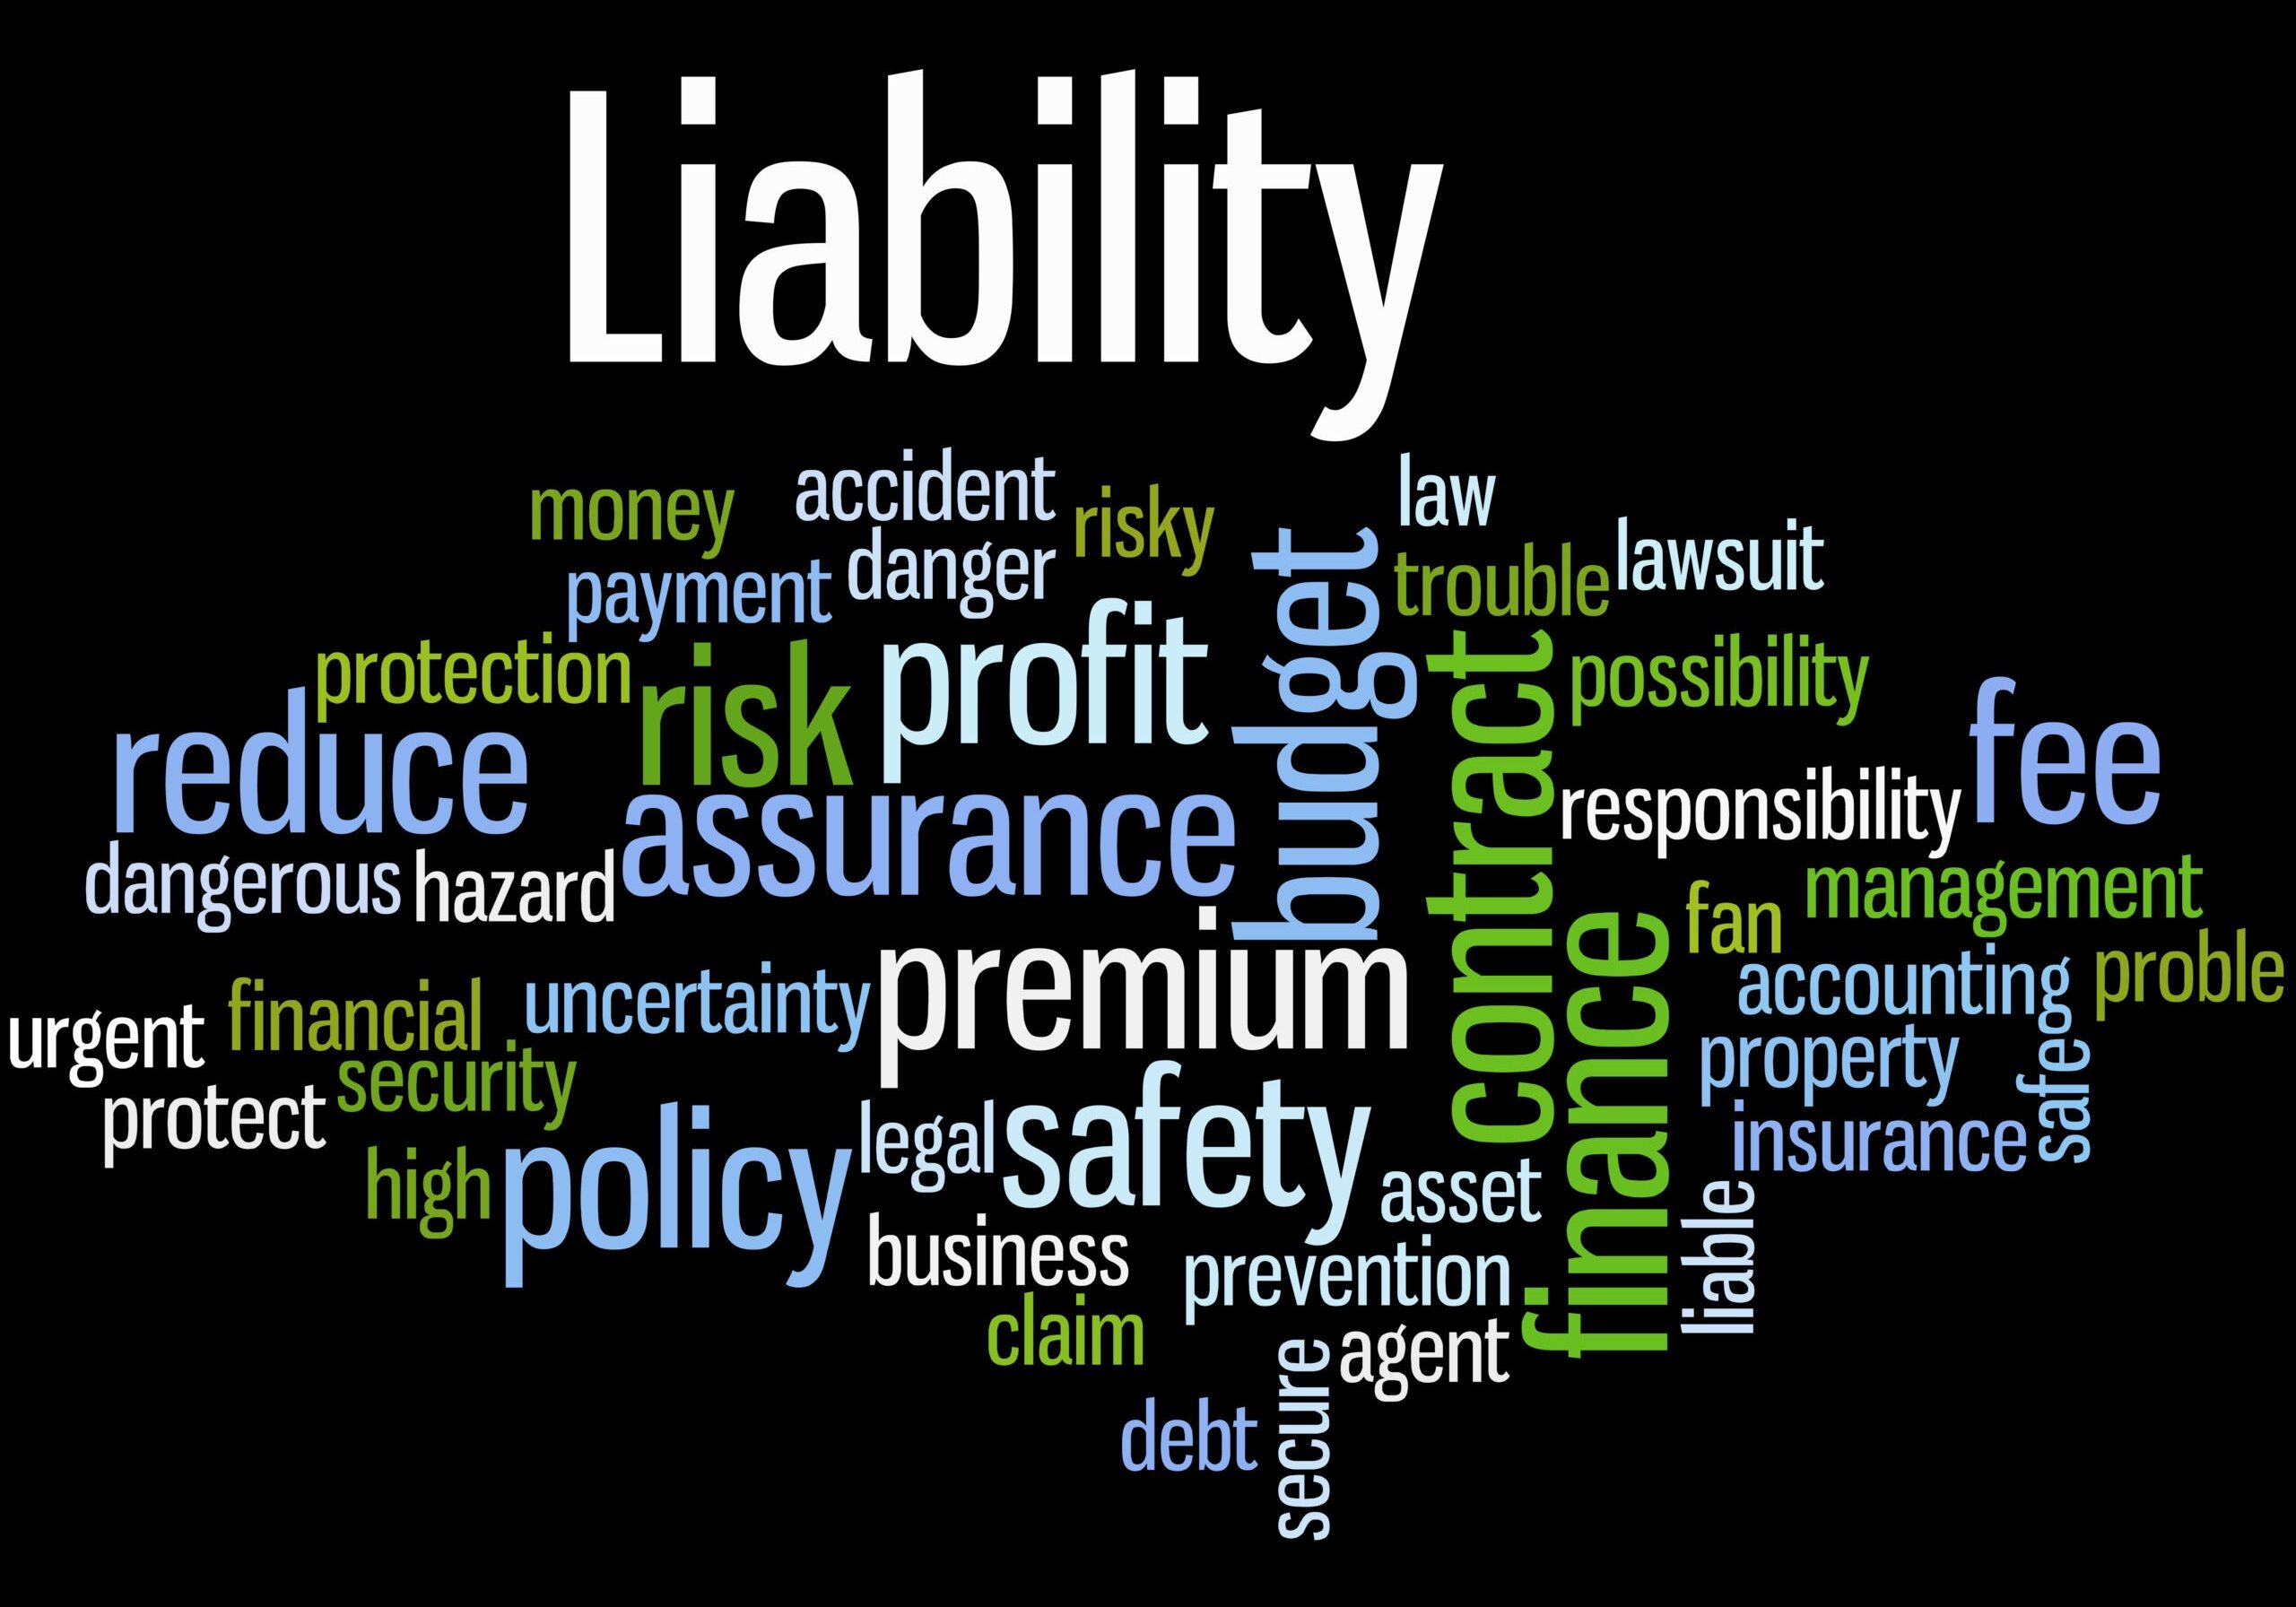 Liability word cloud concept on black background.